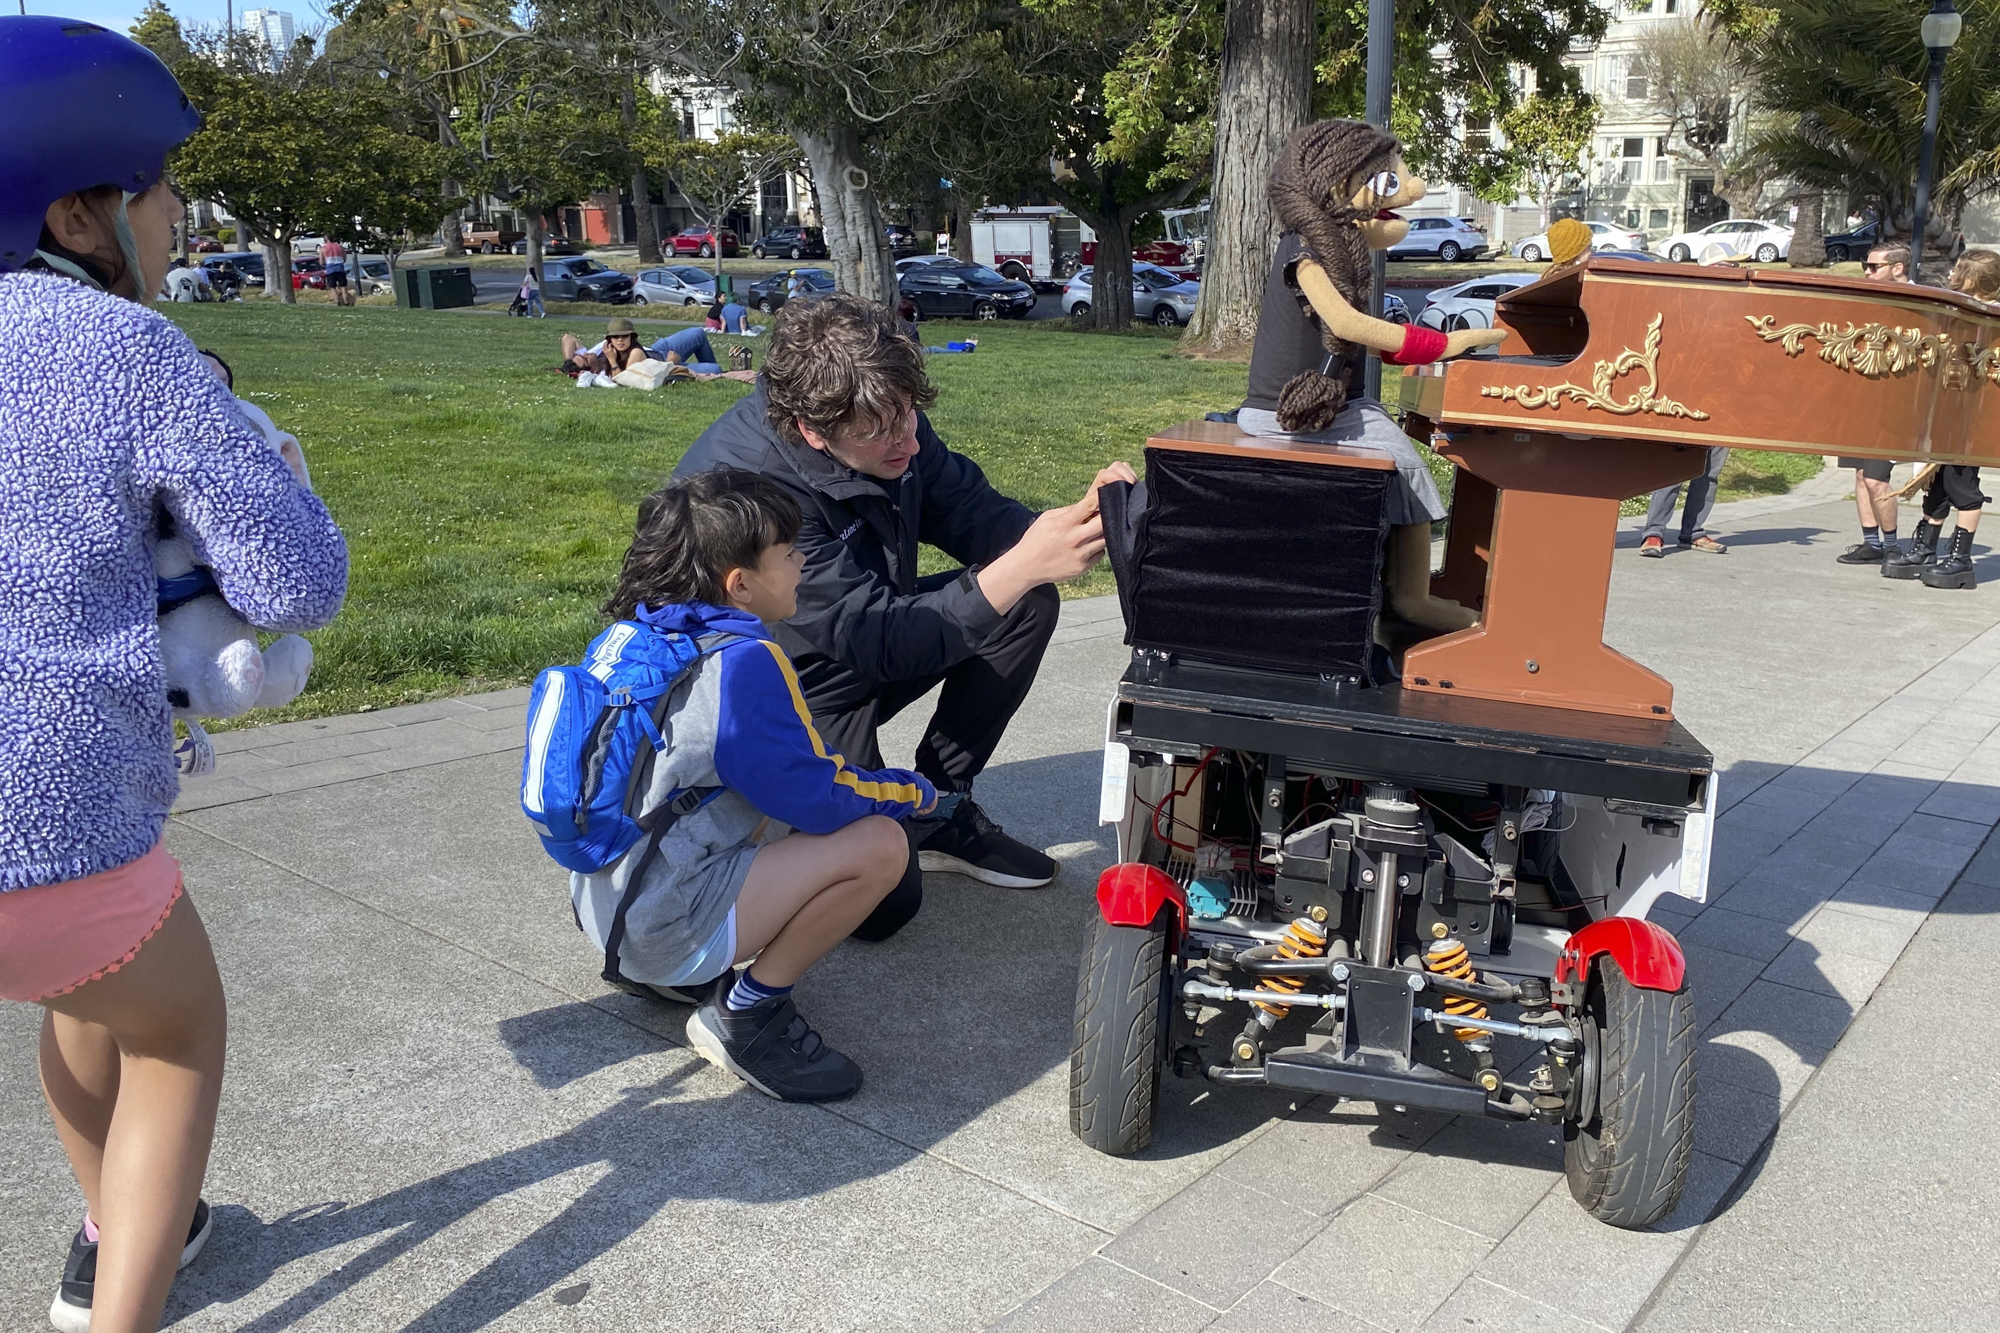 An adult and a child examine a machine atop which sits a puppet playing the piano in an outdoor setting.